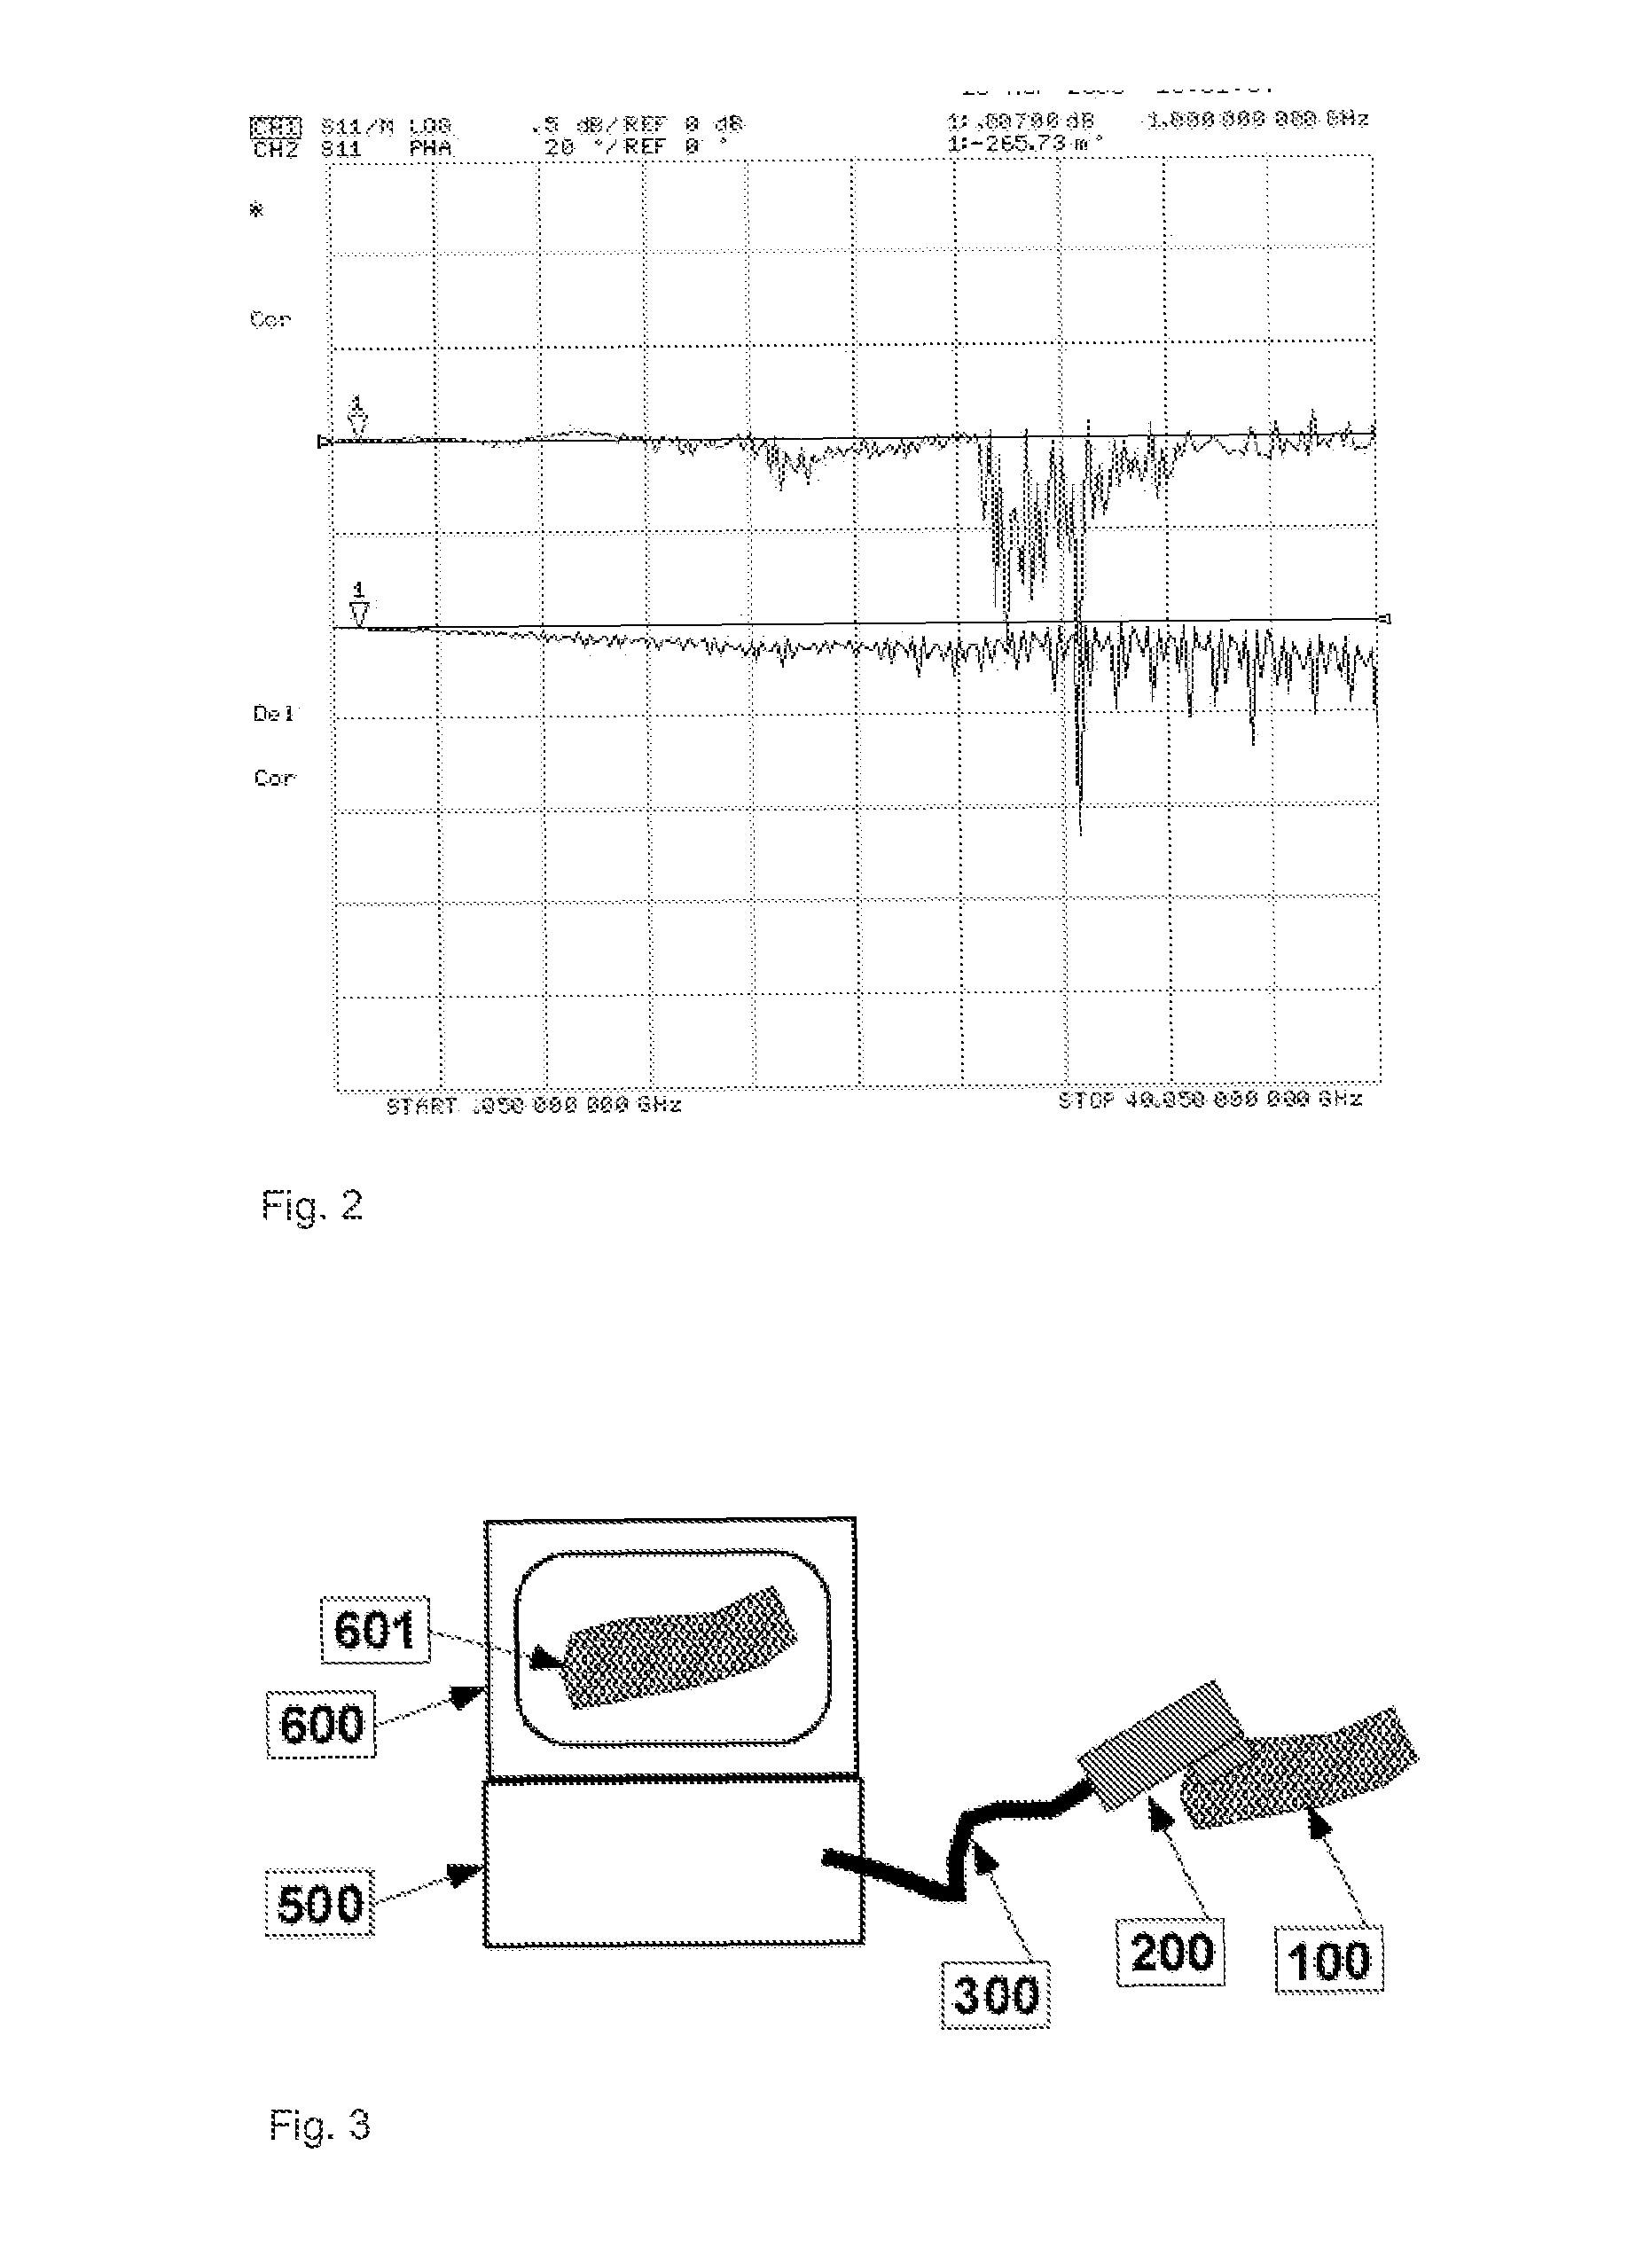 Apparatus and method for near-field imaging of tissue